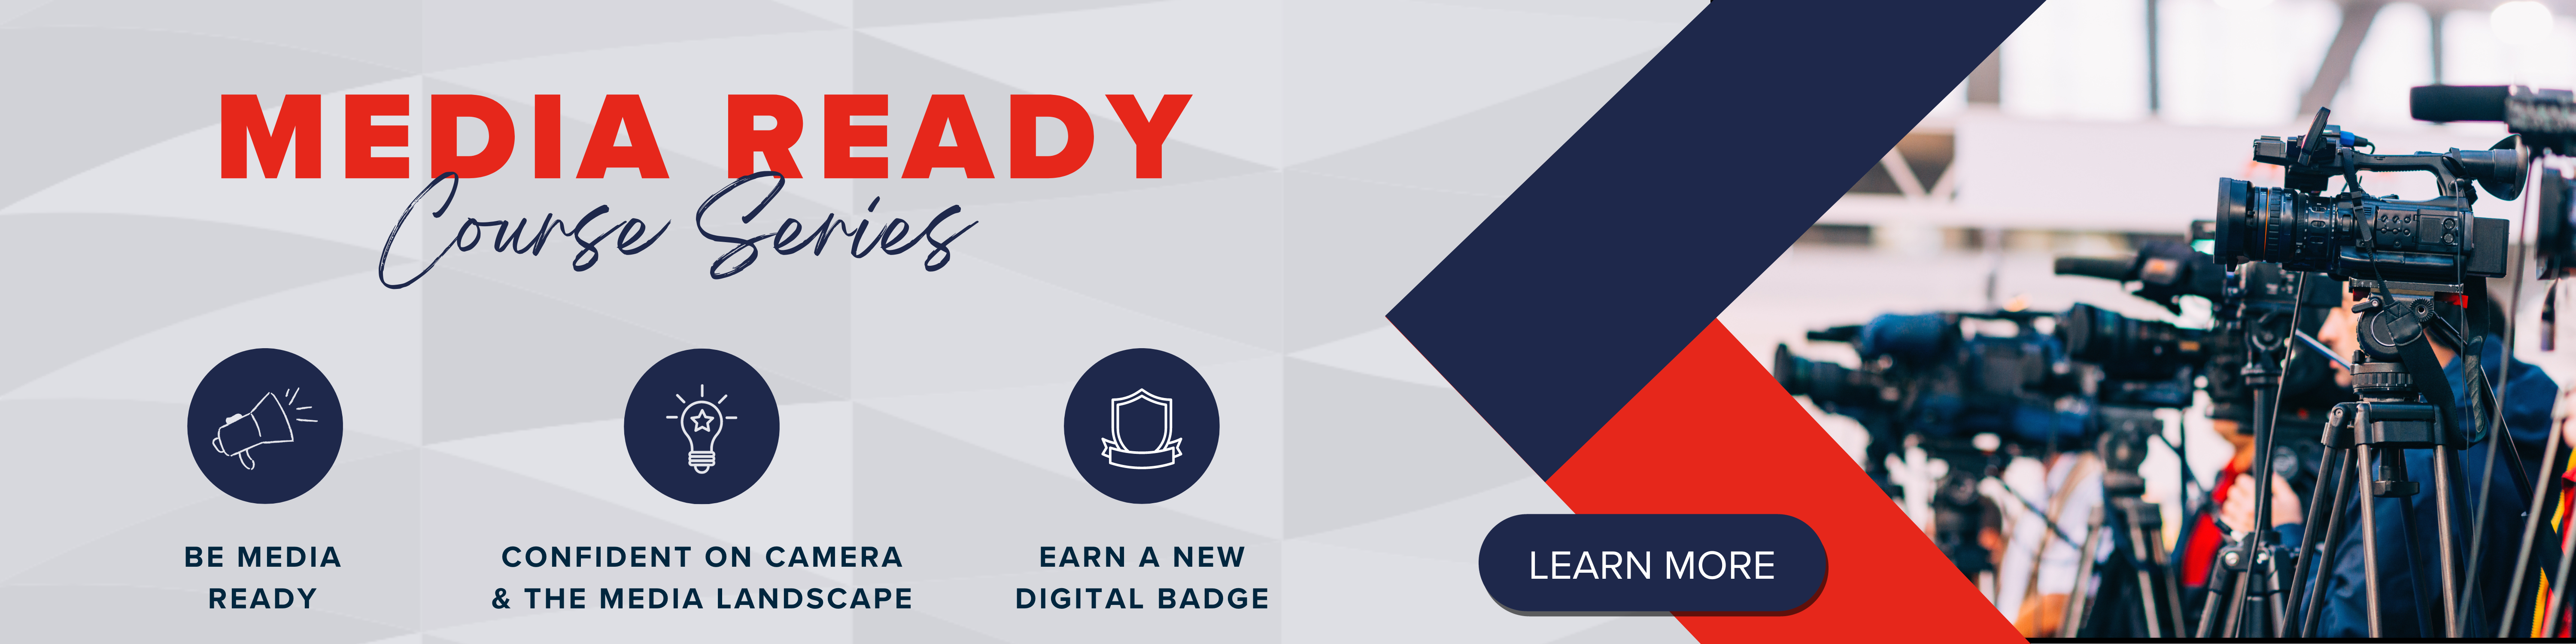 Media ready course series banner. Be media ready, confident on camera, and the media landscape, earn a new digital badge. click to learn more